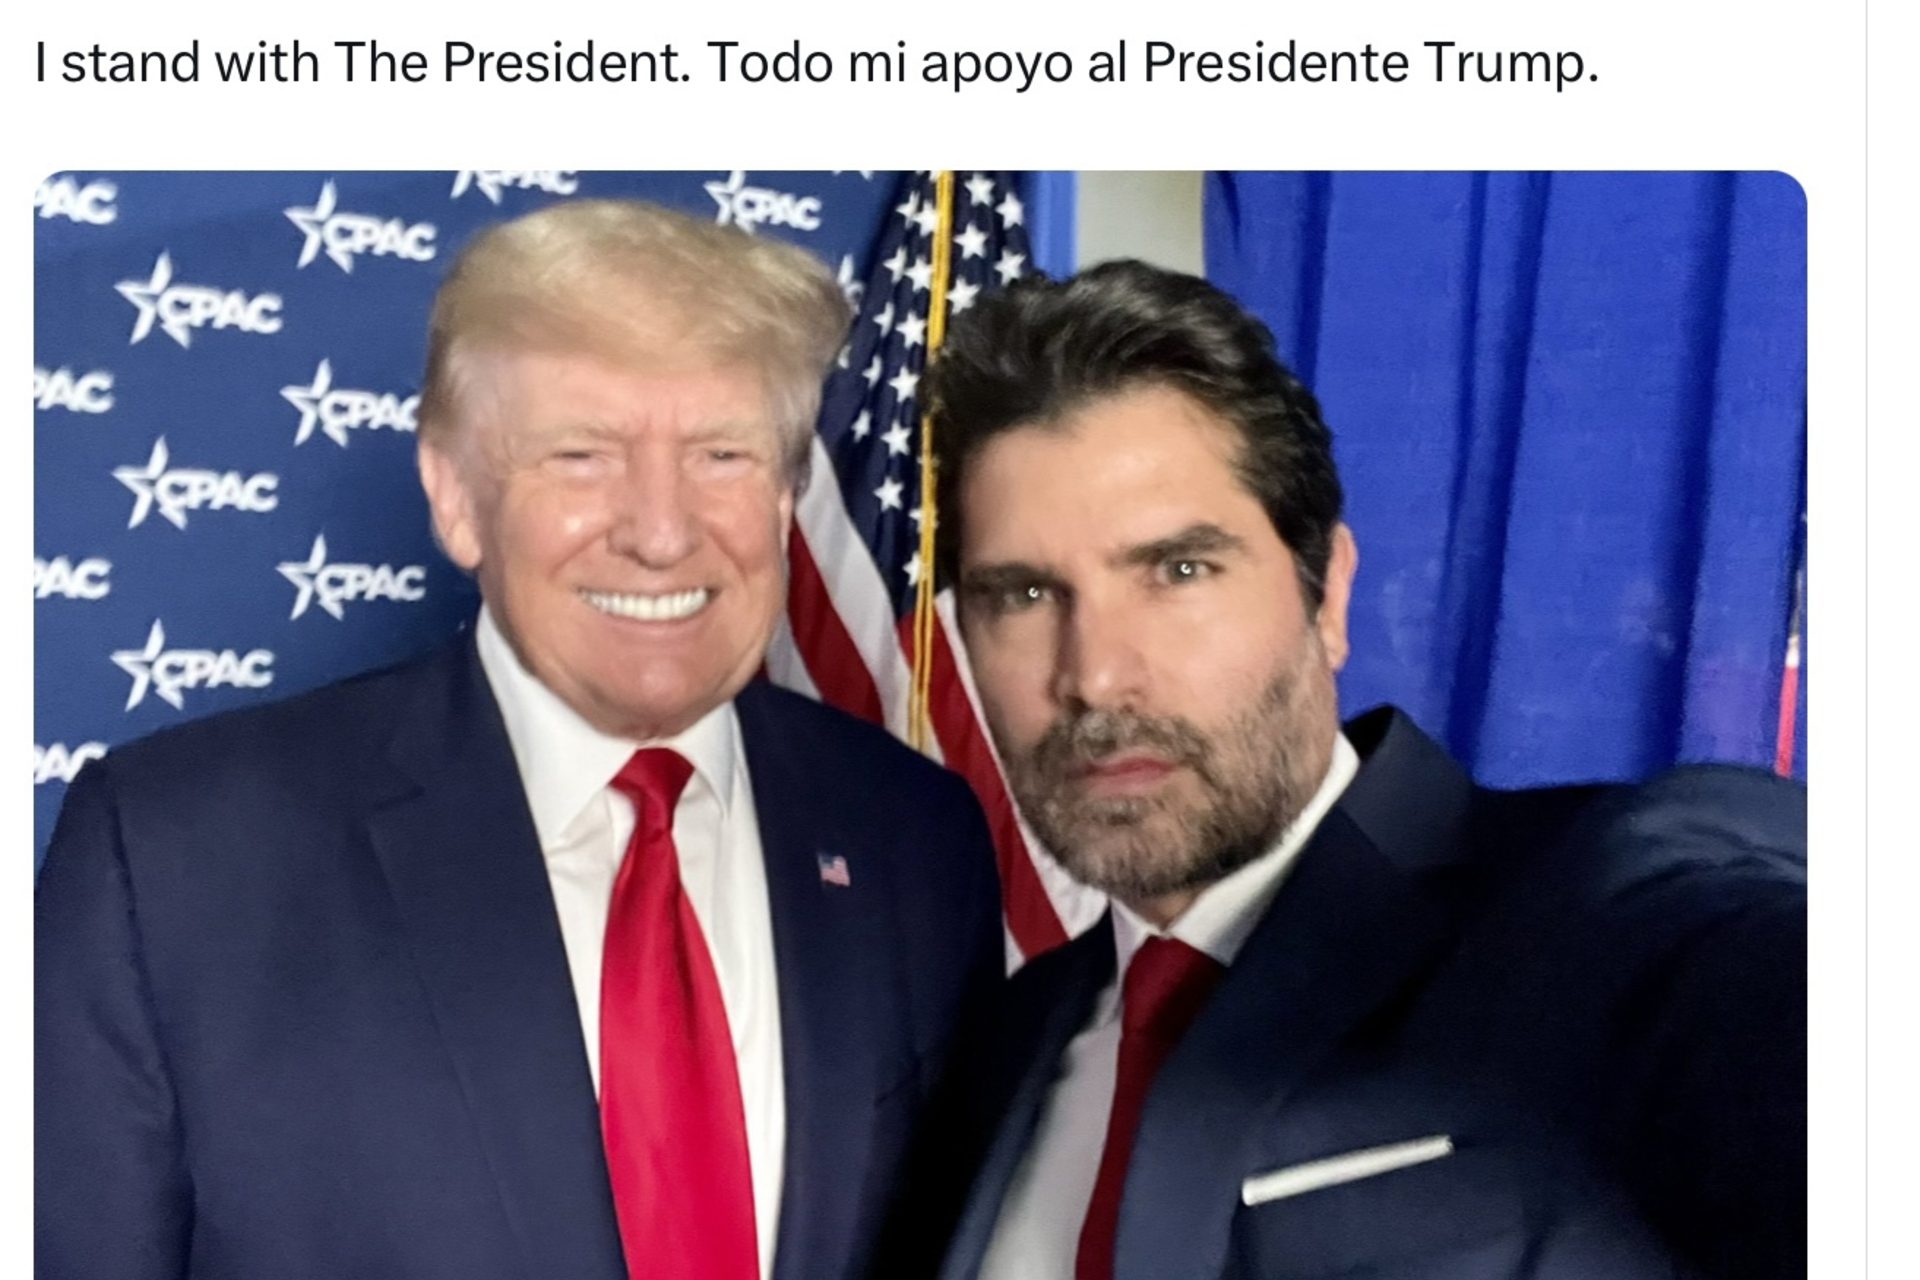 “The future president of Mexico,” according to Trump 